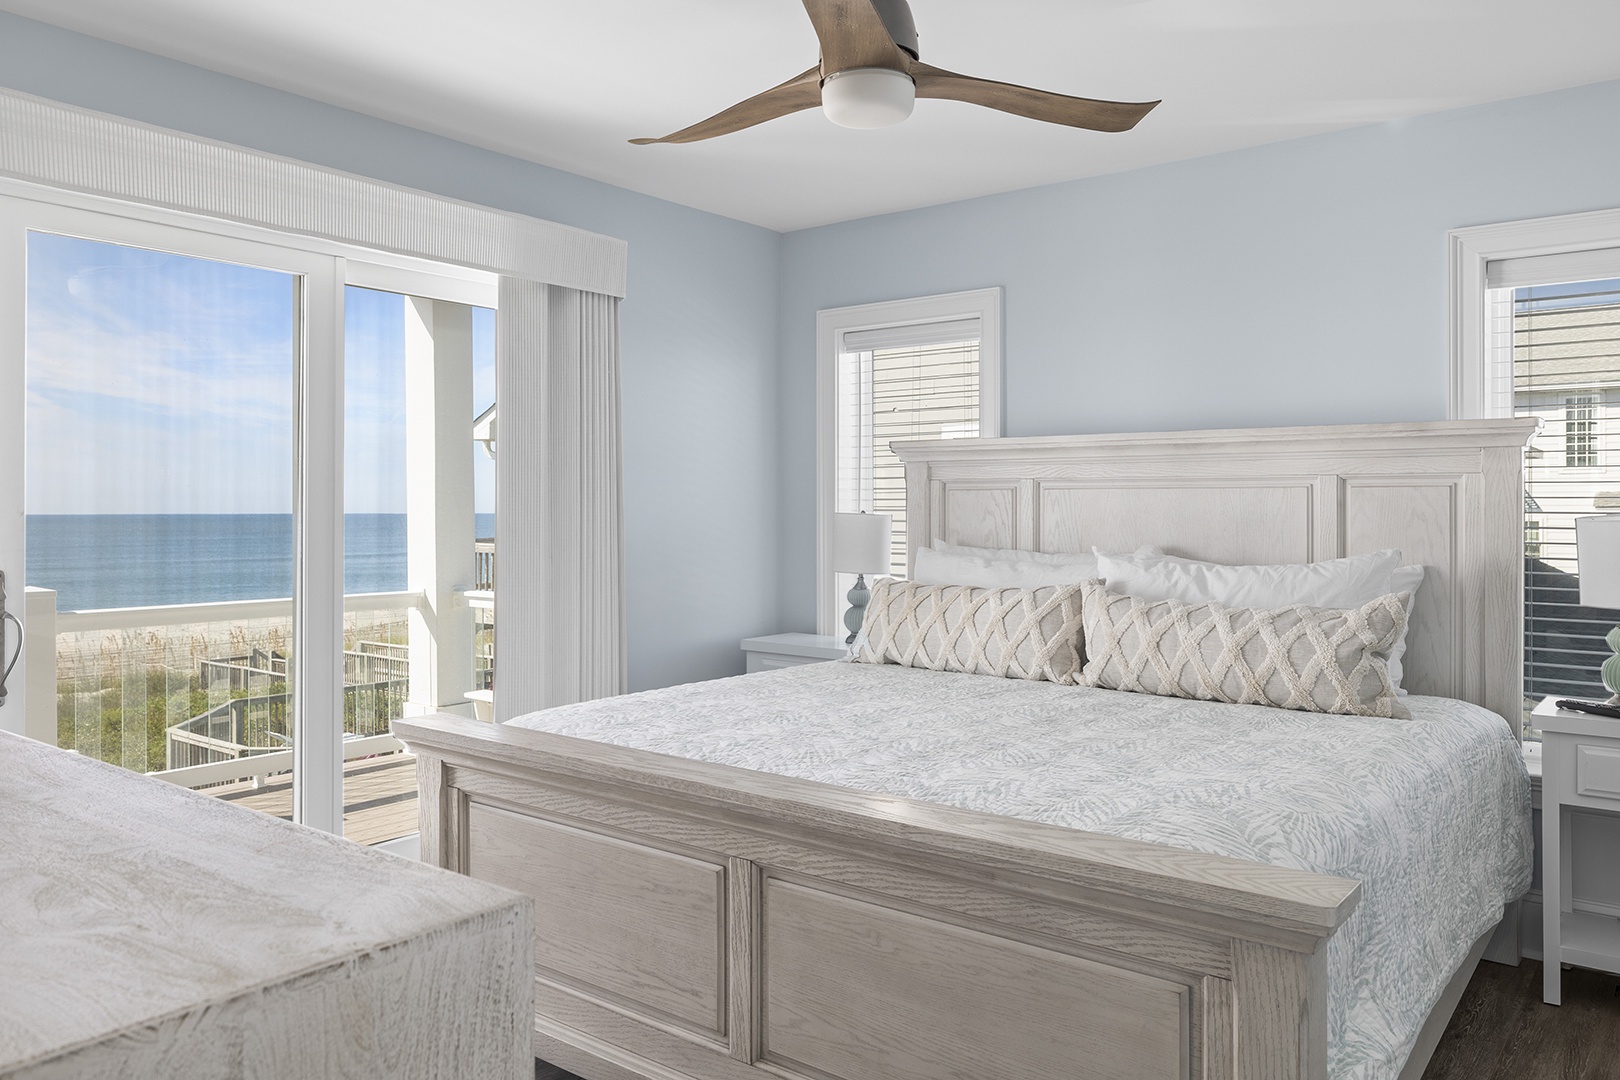 3rd Level Bedroom w/ King Bed, Ocean Views and Balcony Access